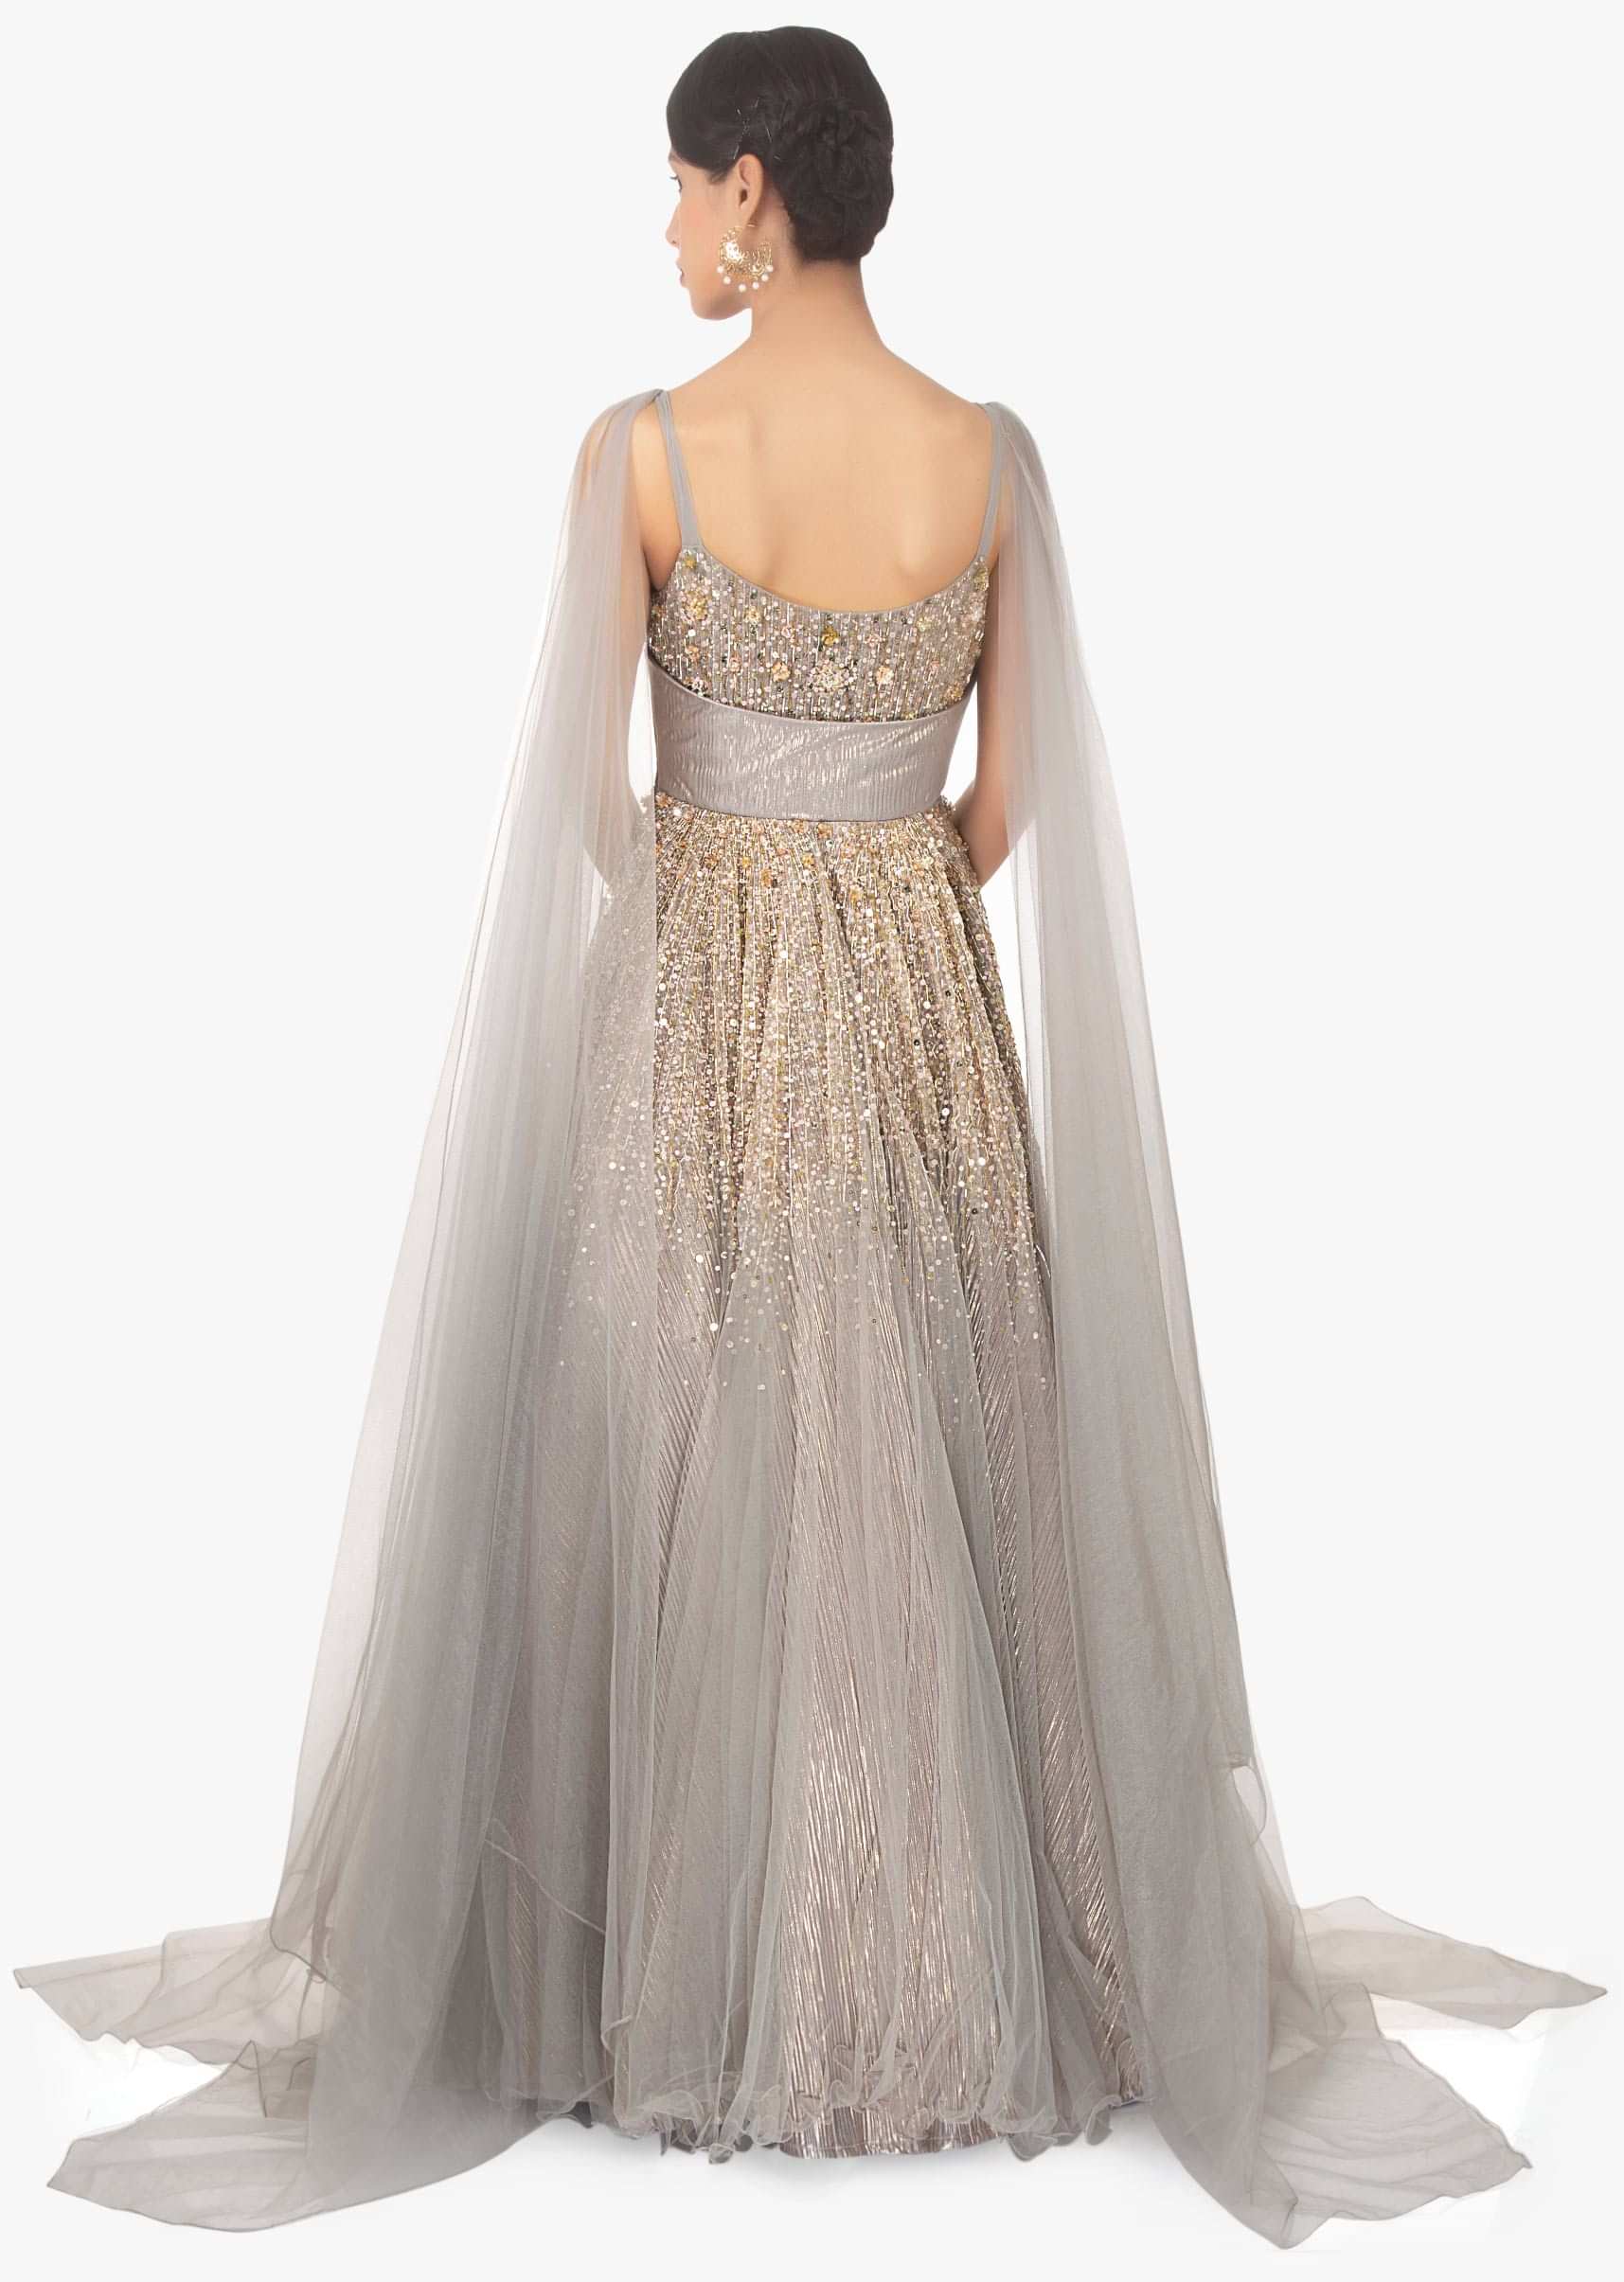 Low line net gown with embellished bodice and waistline